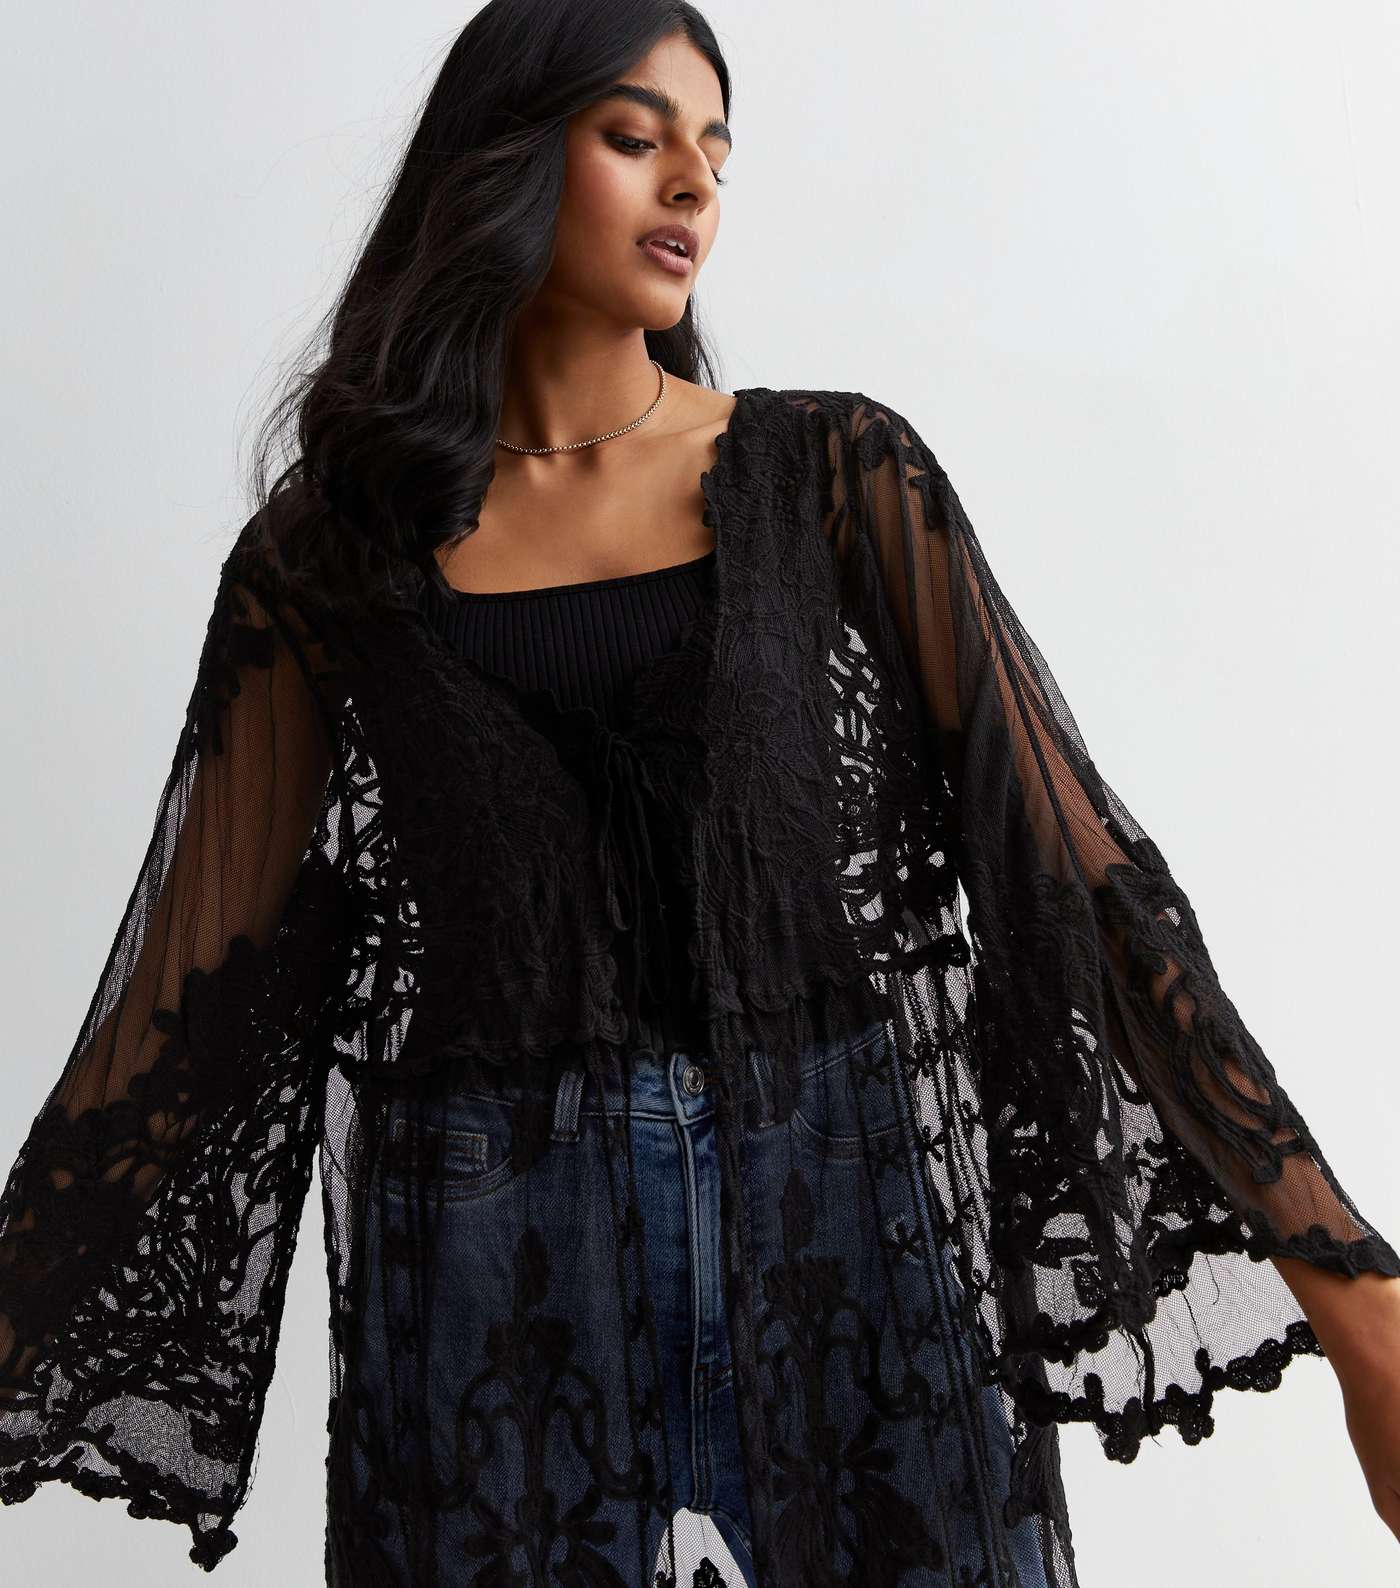 Gini London Black Cotton Embroidered Crochet Knit Cardigan Image 3